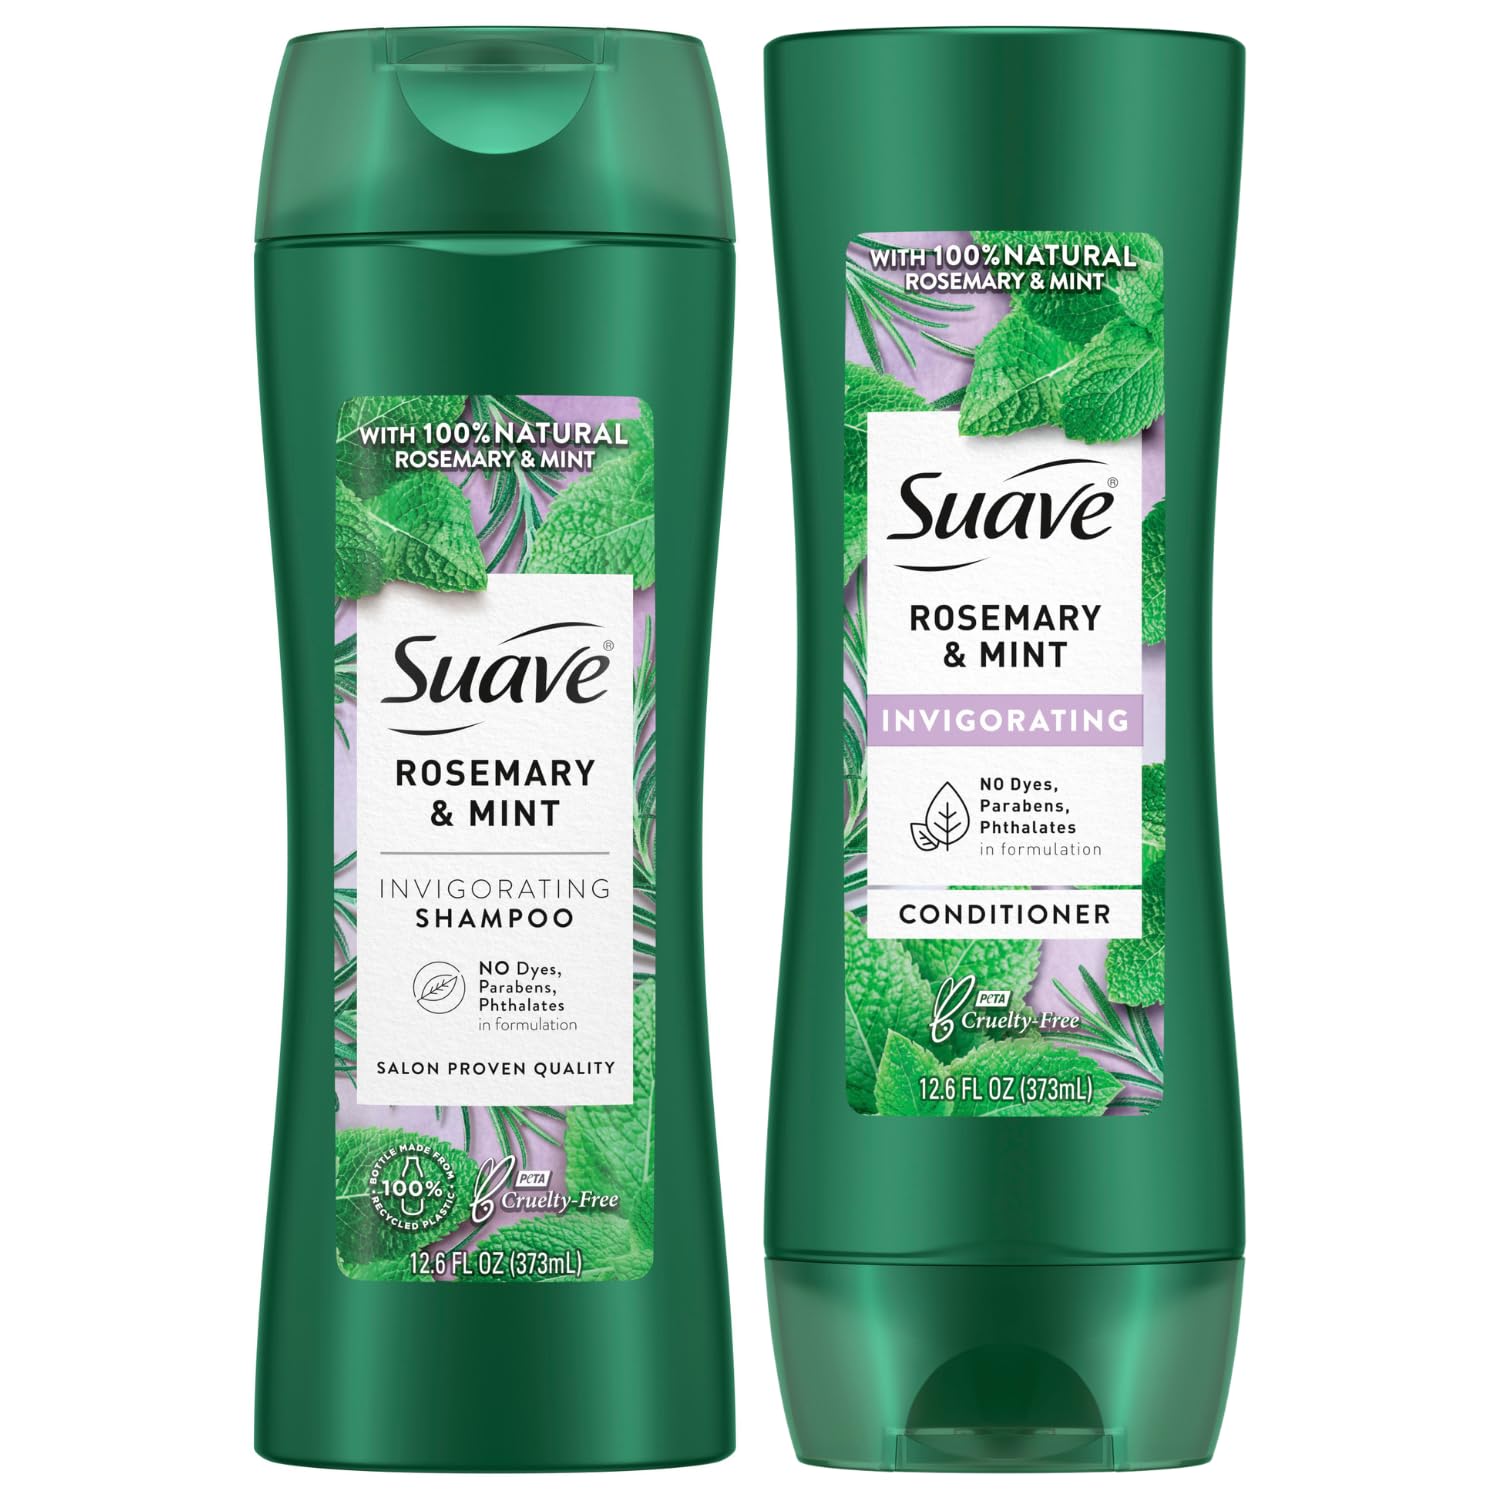 Suave Shampoo and Conditioner Set, Rosemary & Mint - Invigorating Rosemary Mint Clarifying Shampoo & Conditioner, Hair Strengthening, Scented, 12.6 Oz Ea (2 Piece Set)